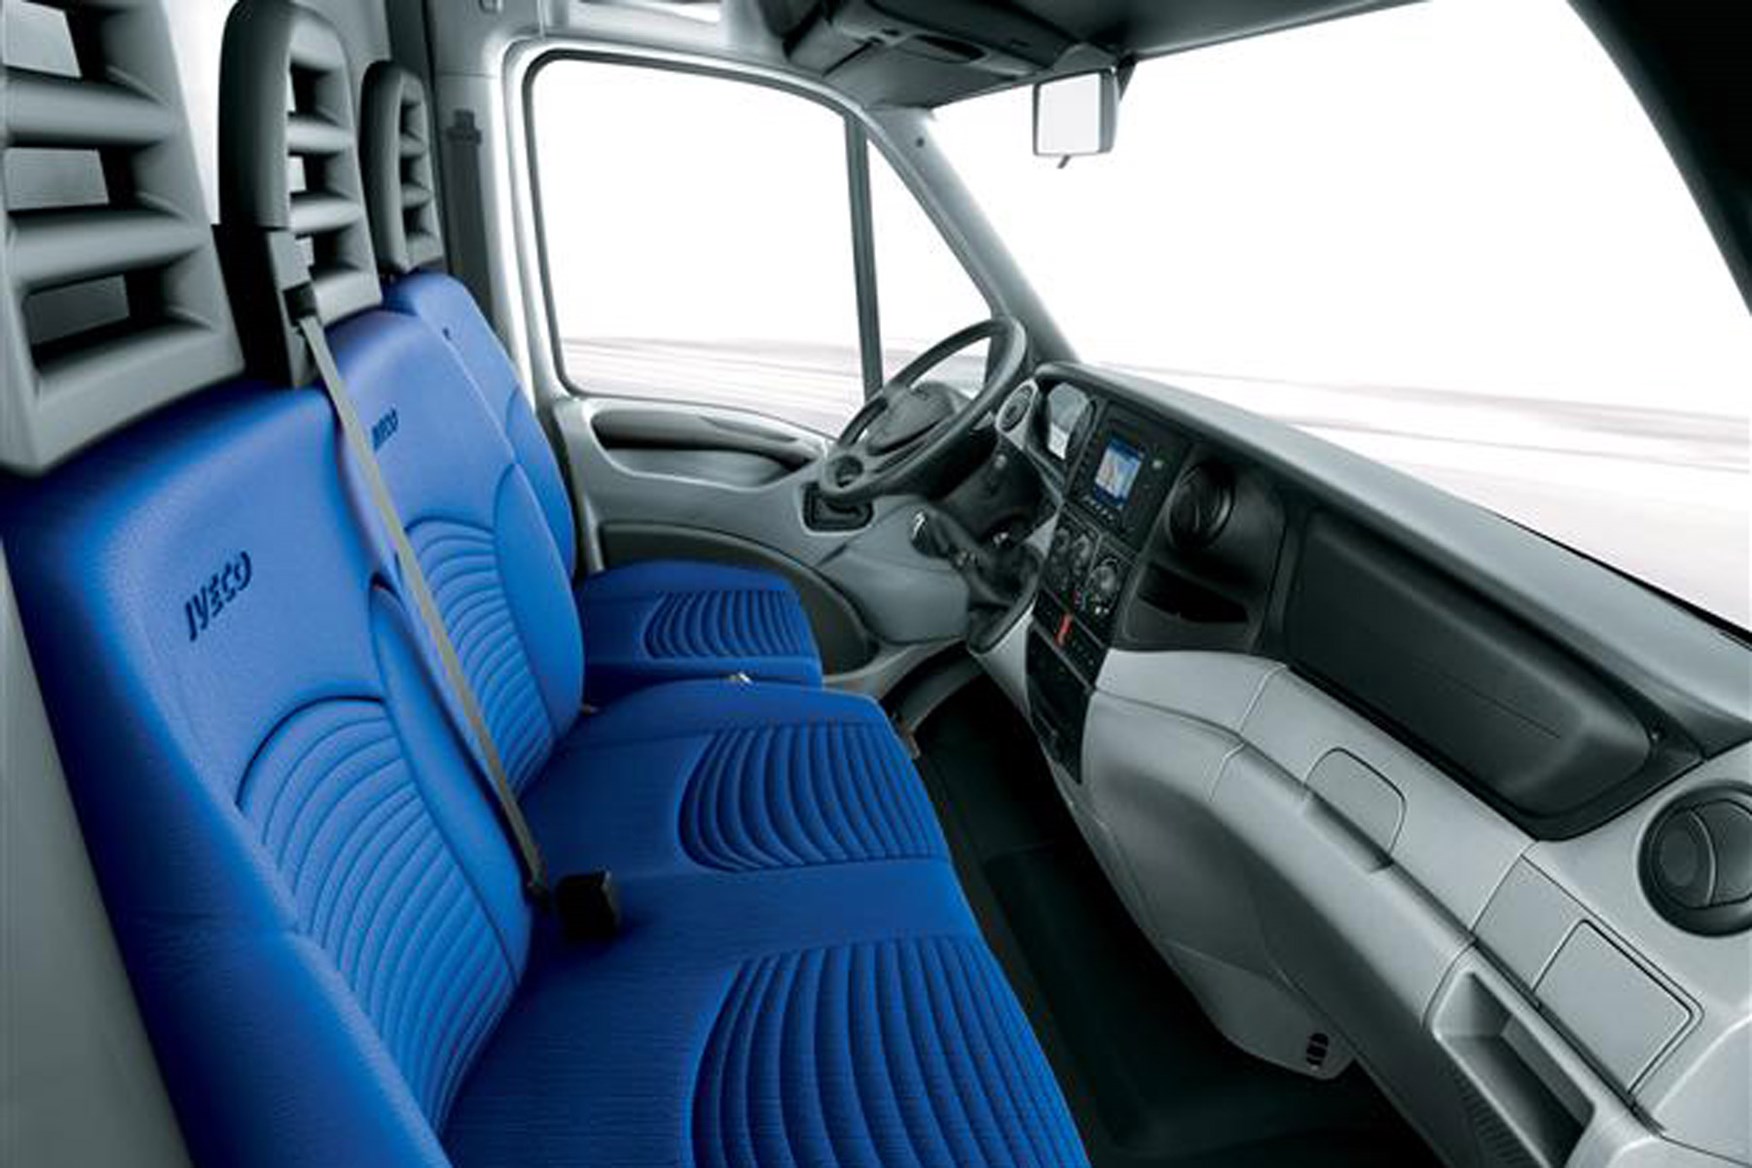 Iveco Daily 2006-2009 review on Parkers Vans - cabin, interior